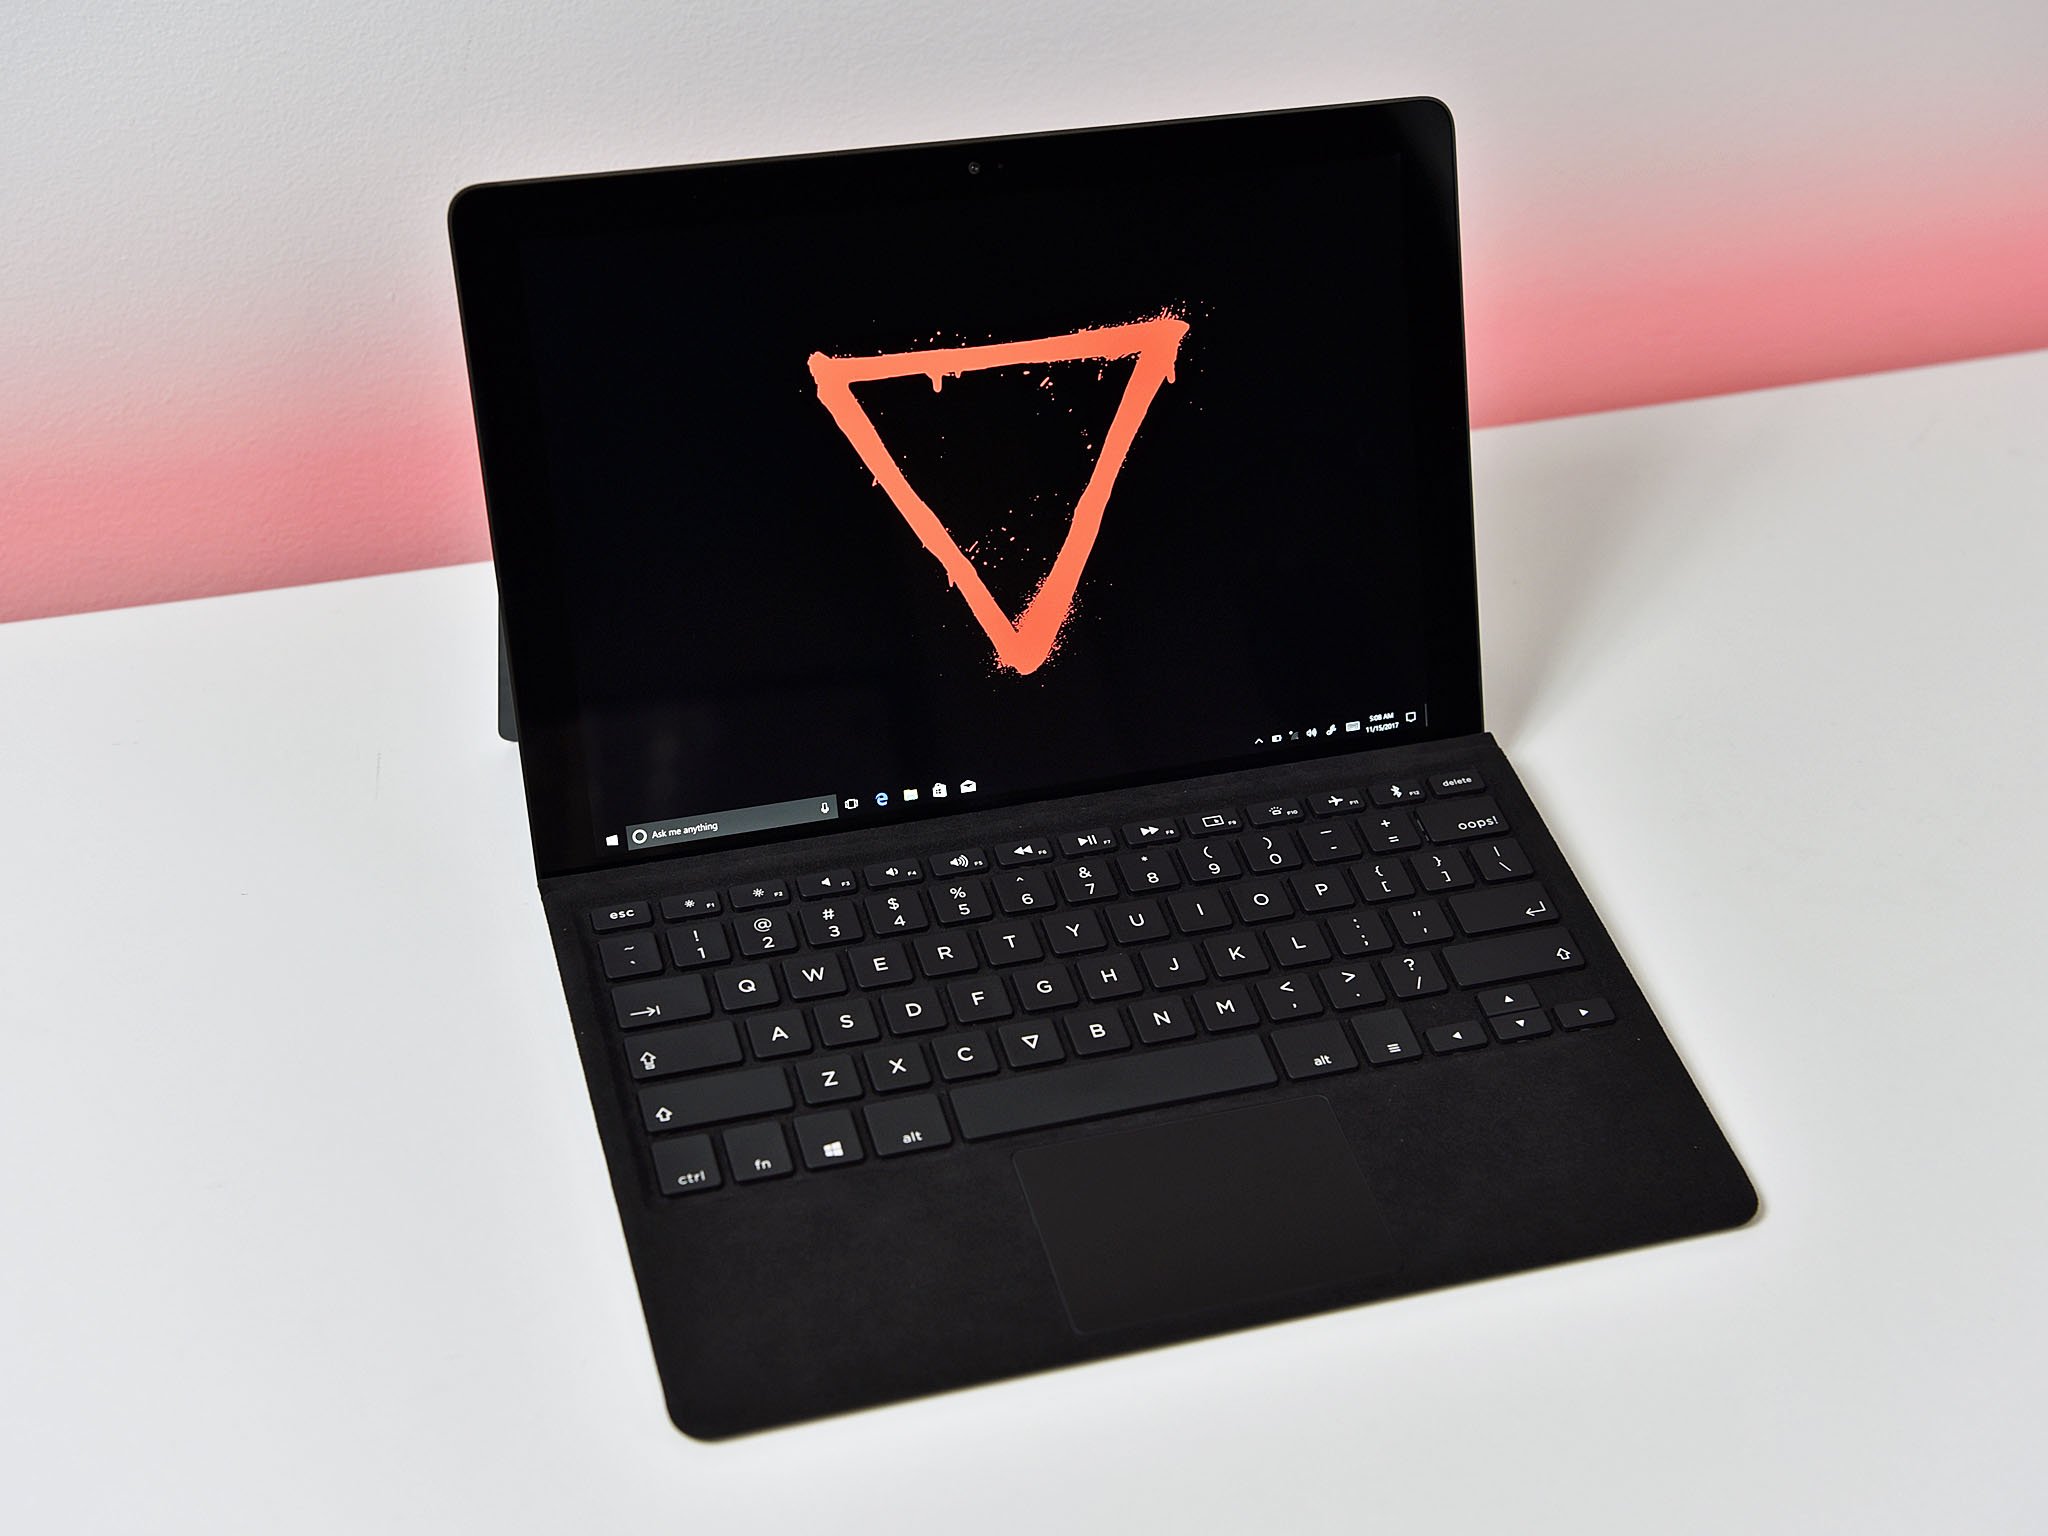 Eve V tablet goes up for grabs as part of flash sale